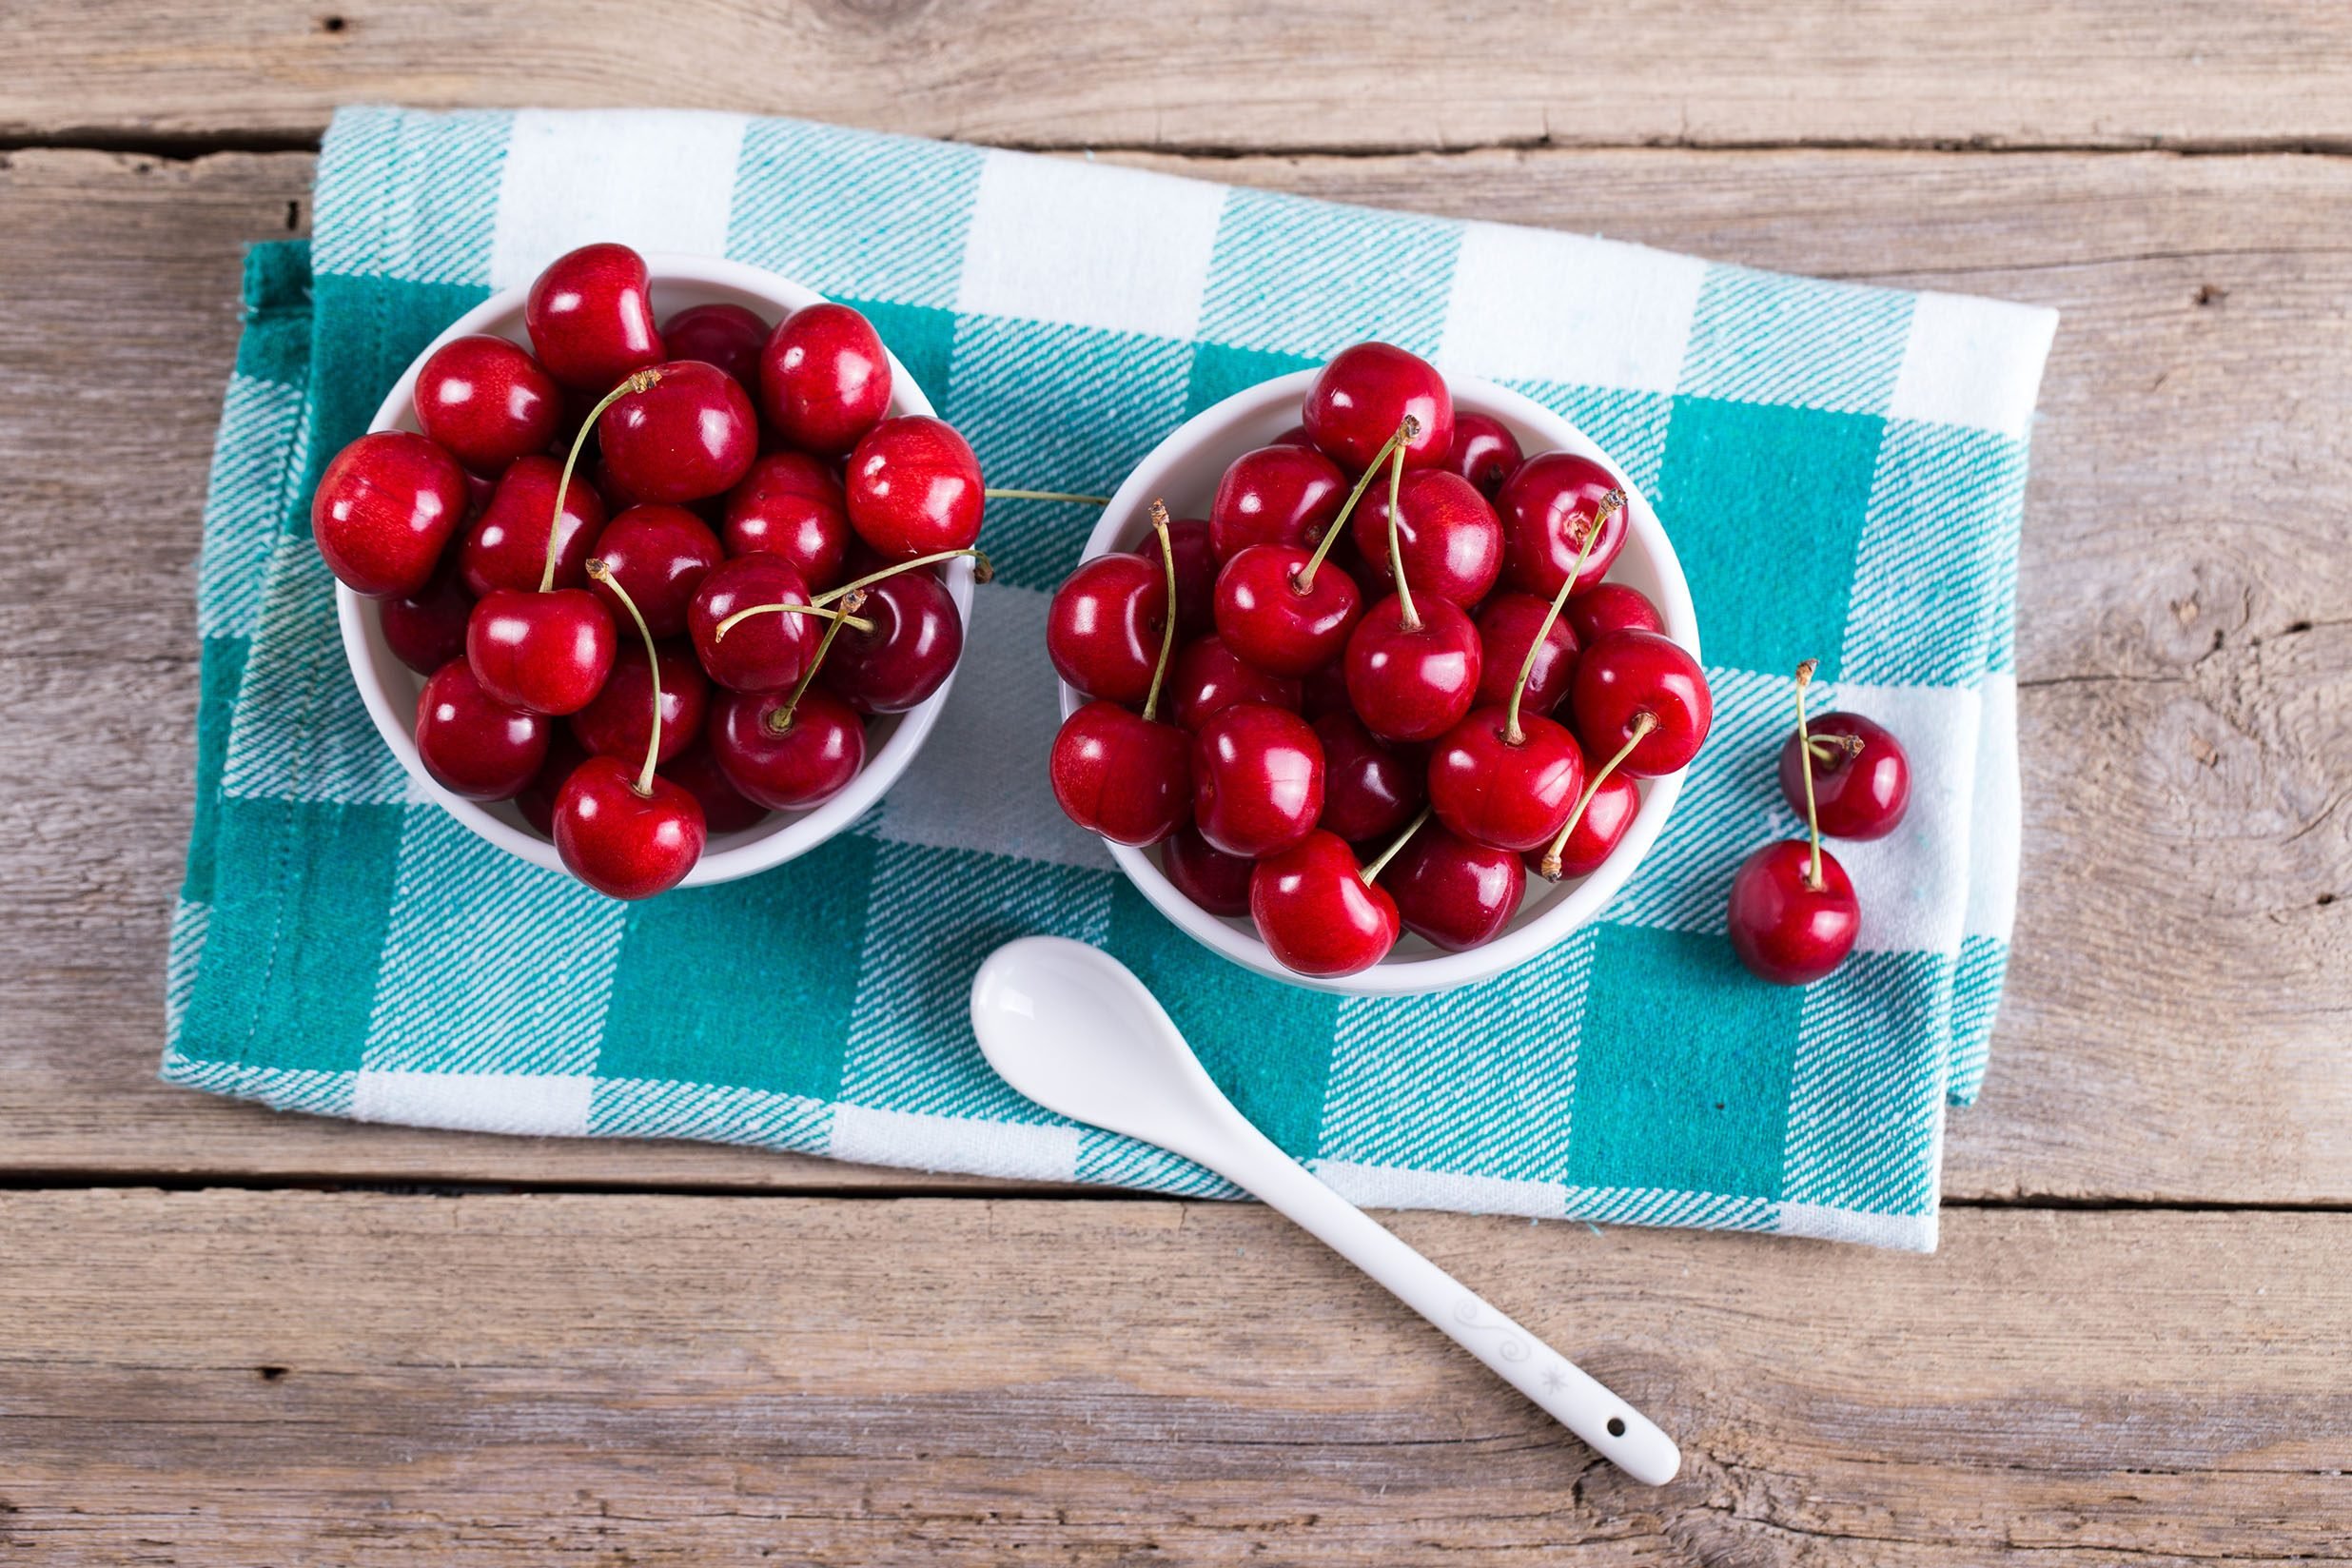 The Health Benefits Of Eating Cherries